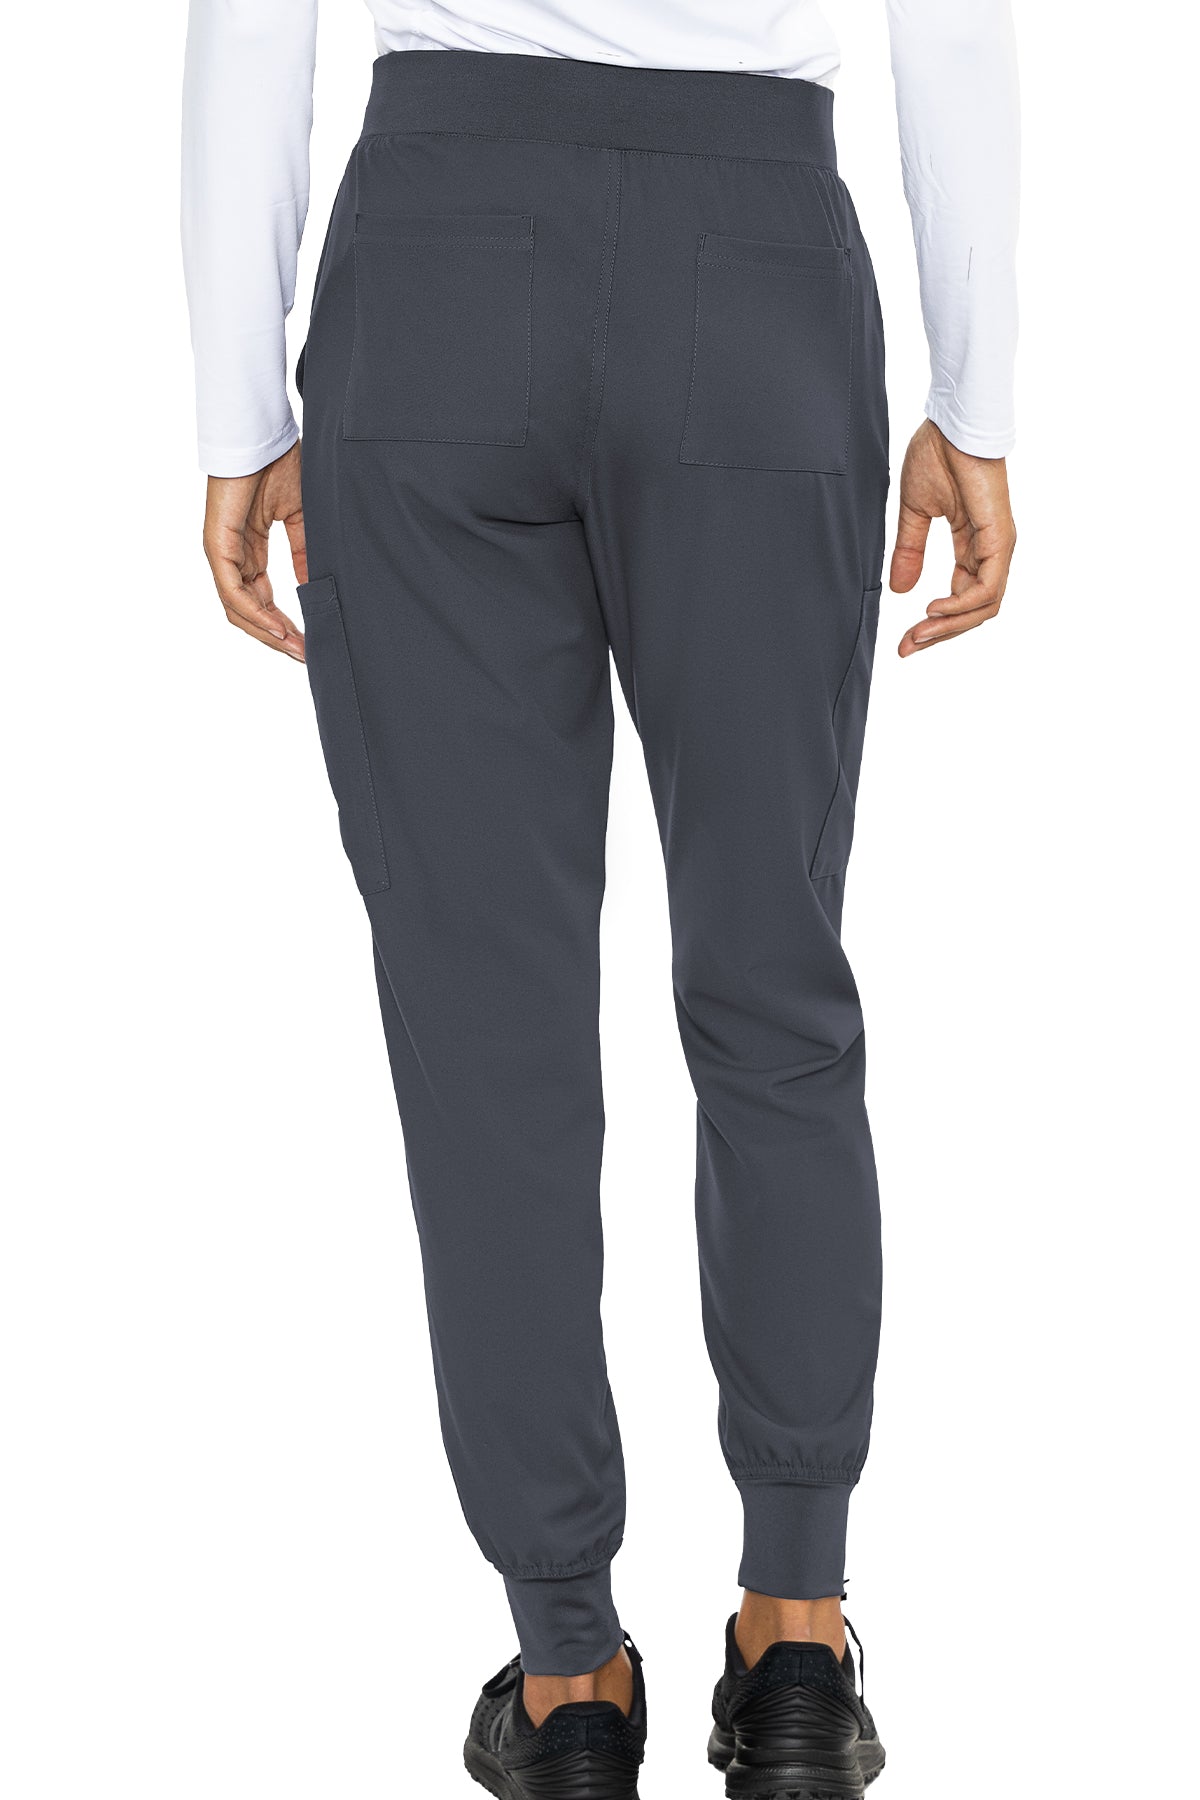 Med Couture 2711 Insight Jogger Pant Pewter Back